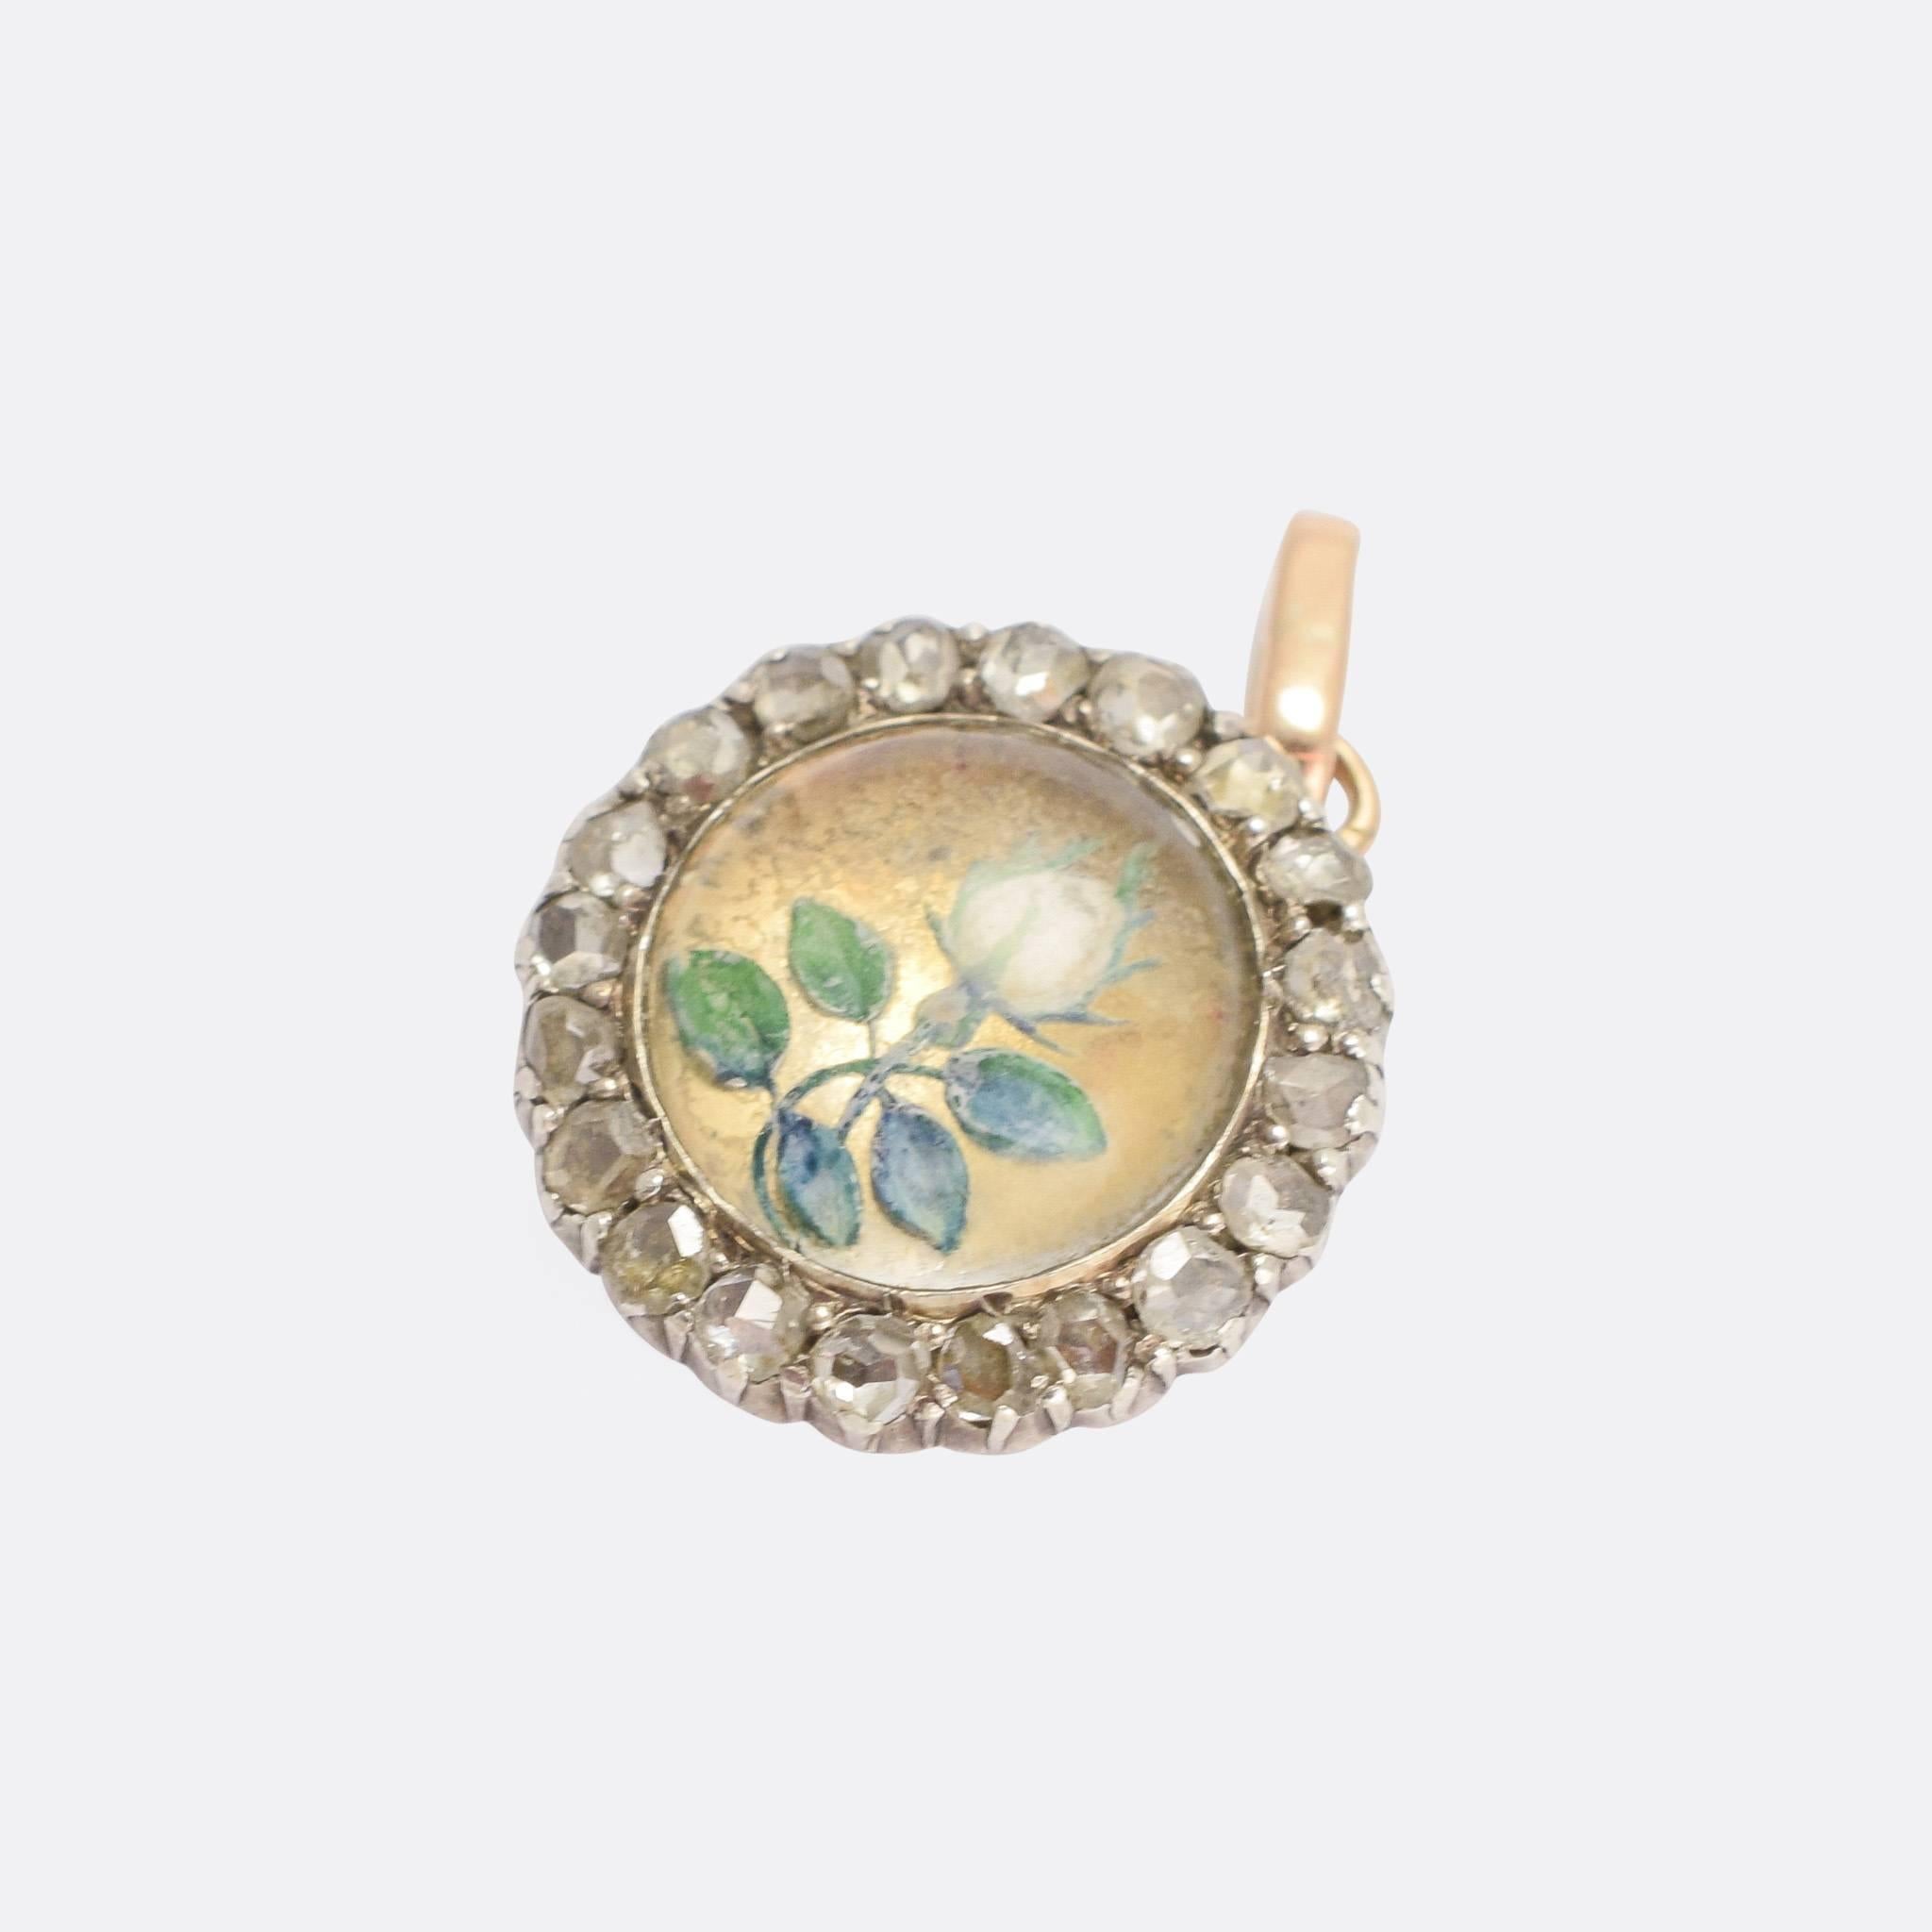 A second antique round locket (see previous post...), this one very different in style. It dates to the mid-Victorain era - circa 1860 - and is set with a reverse carved Essex crystal; the subject is a white rose, delicately hand painted. Around the